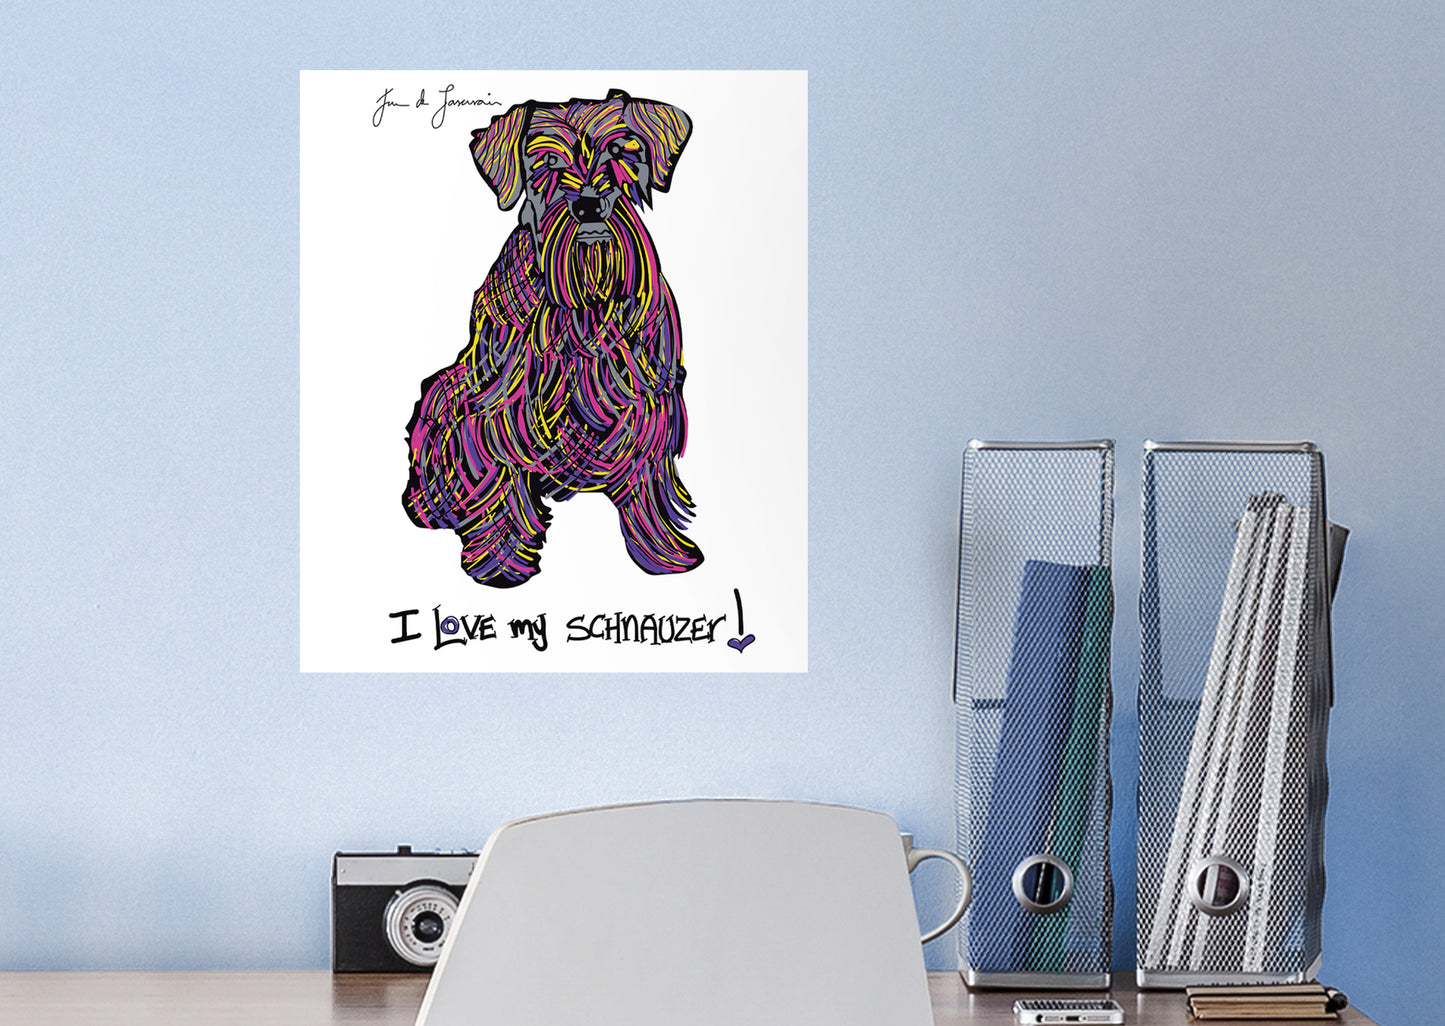 Dream Big Art:  I Love My Schnauzer Mural        - Officially Licensed Juan de Lascurain Removable Wall   Adhesive Decal